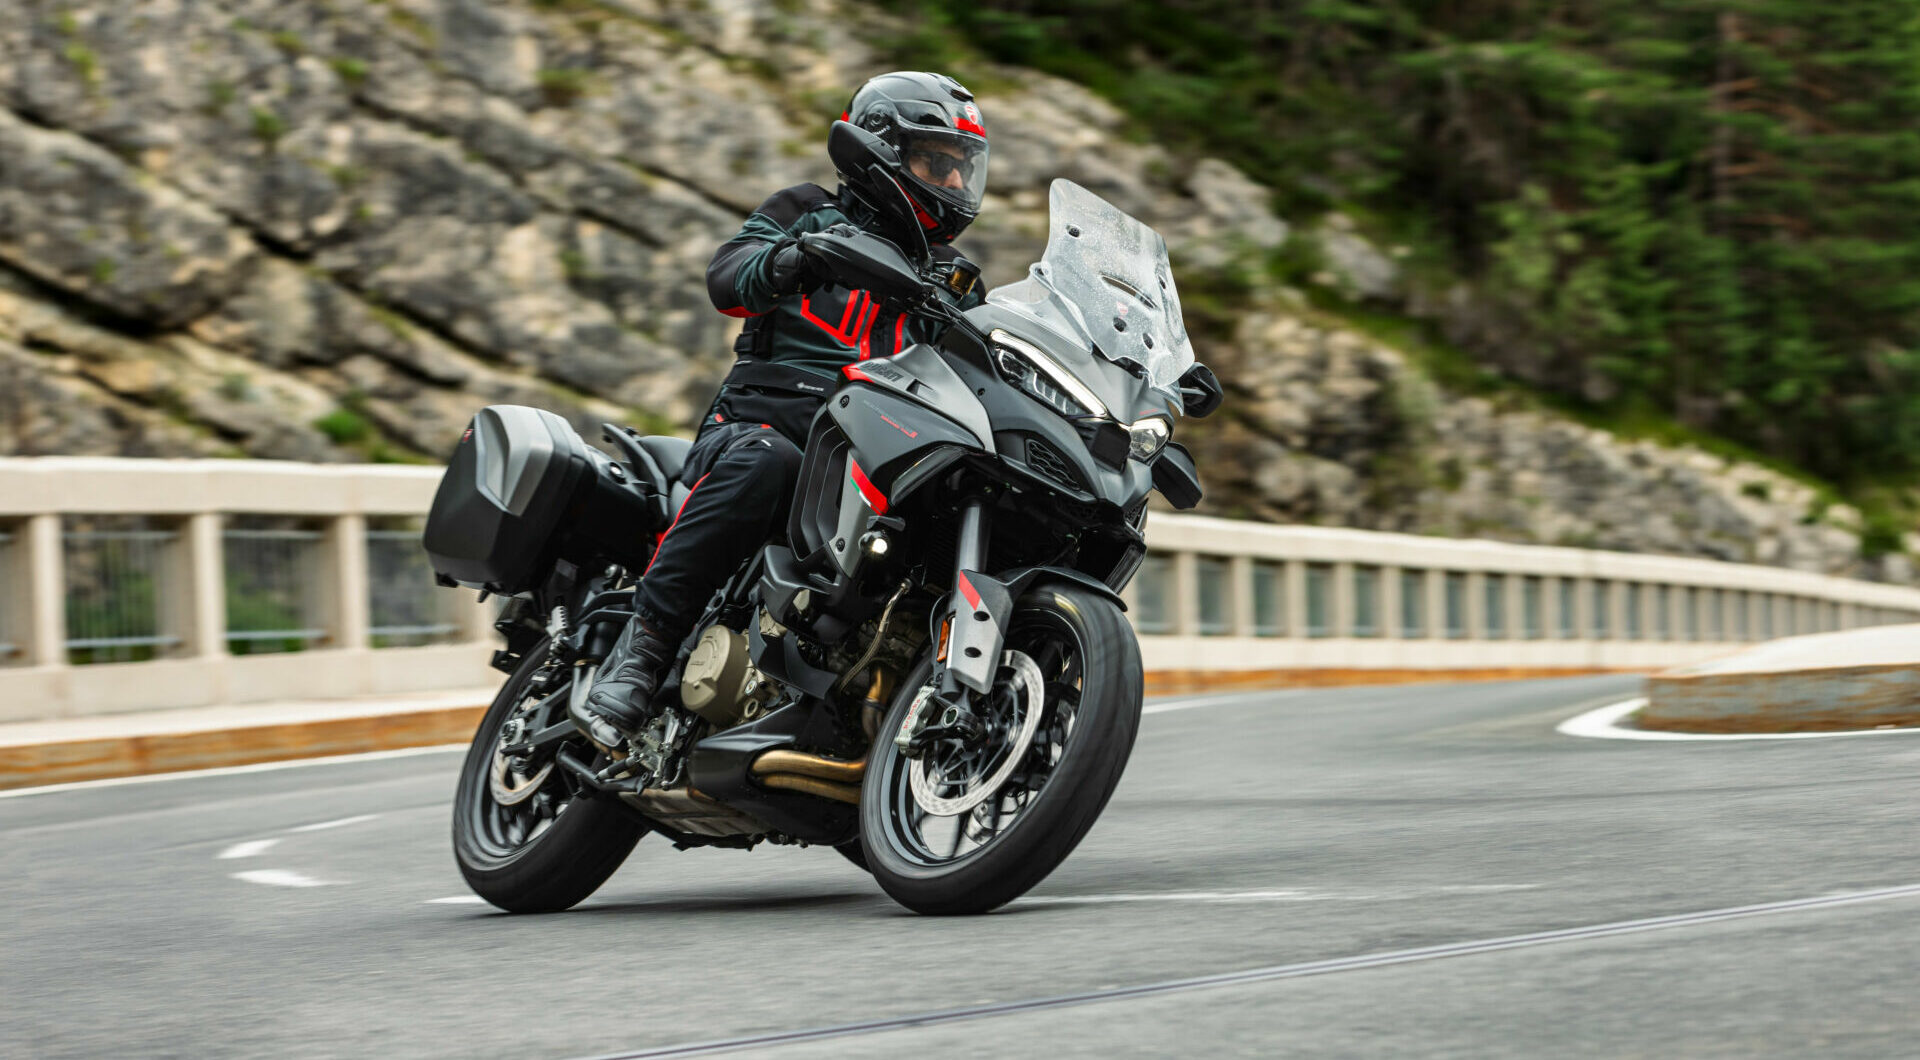 Ducati designed the 2024 Multistrada V4 S Grand Tour for riders who like to tour with high levels of comfort and safety. Photo courtesy Ducati.